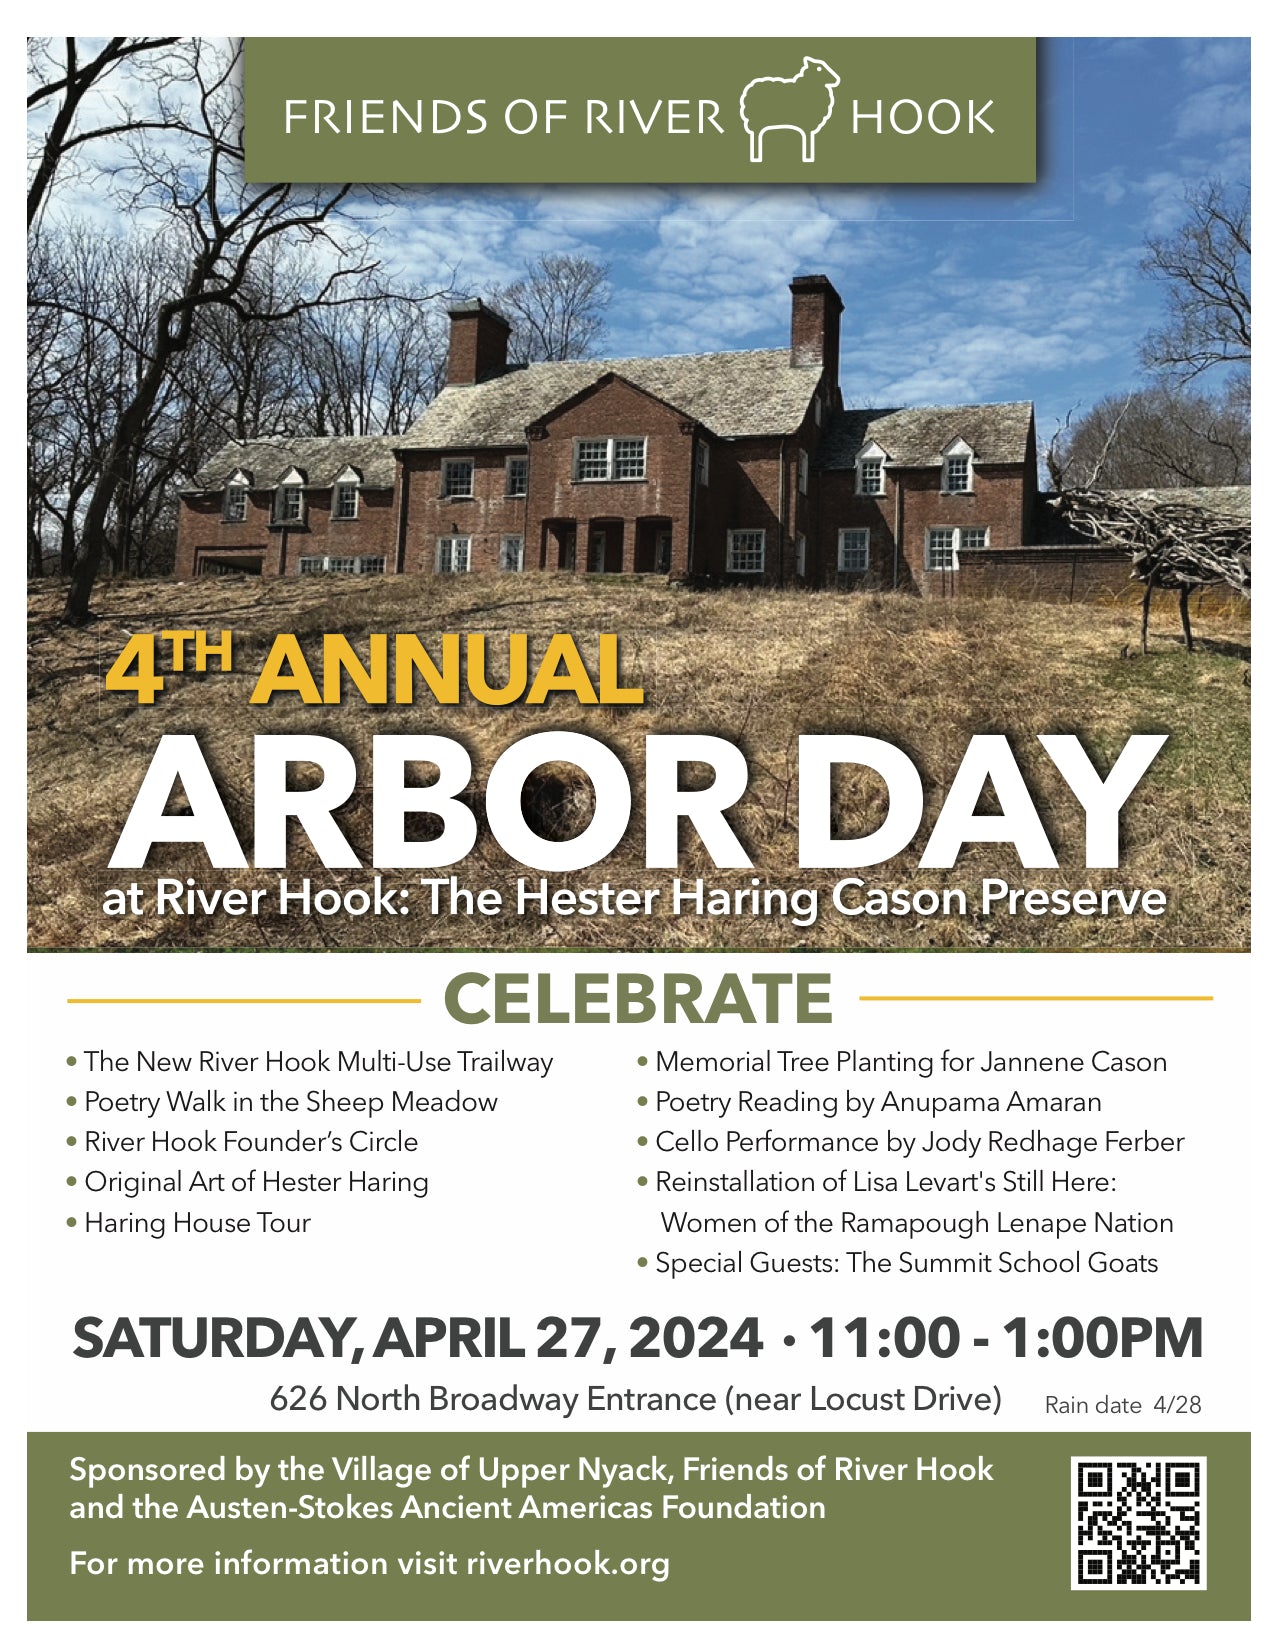 Come to our 4th Annual Arbor Day Event, April 27